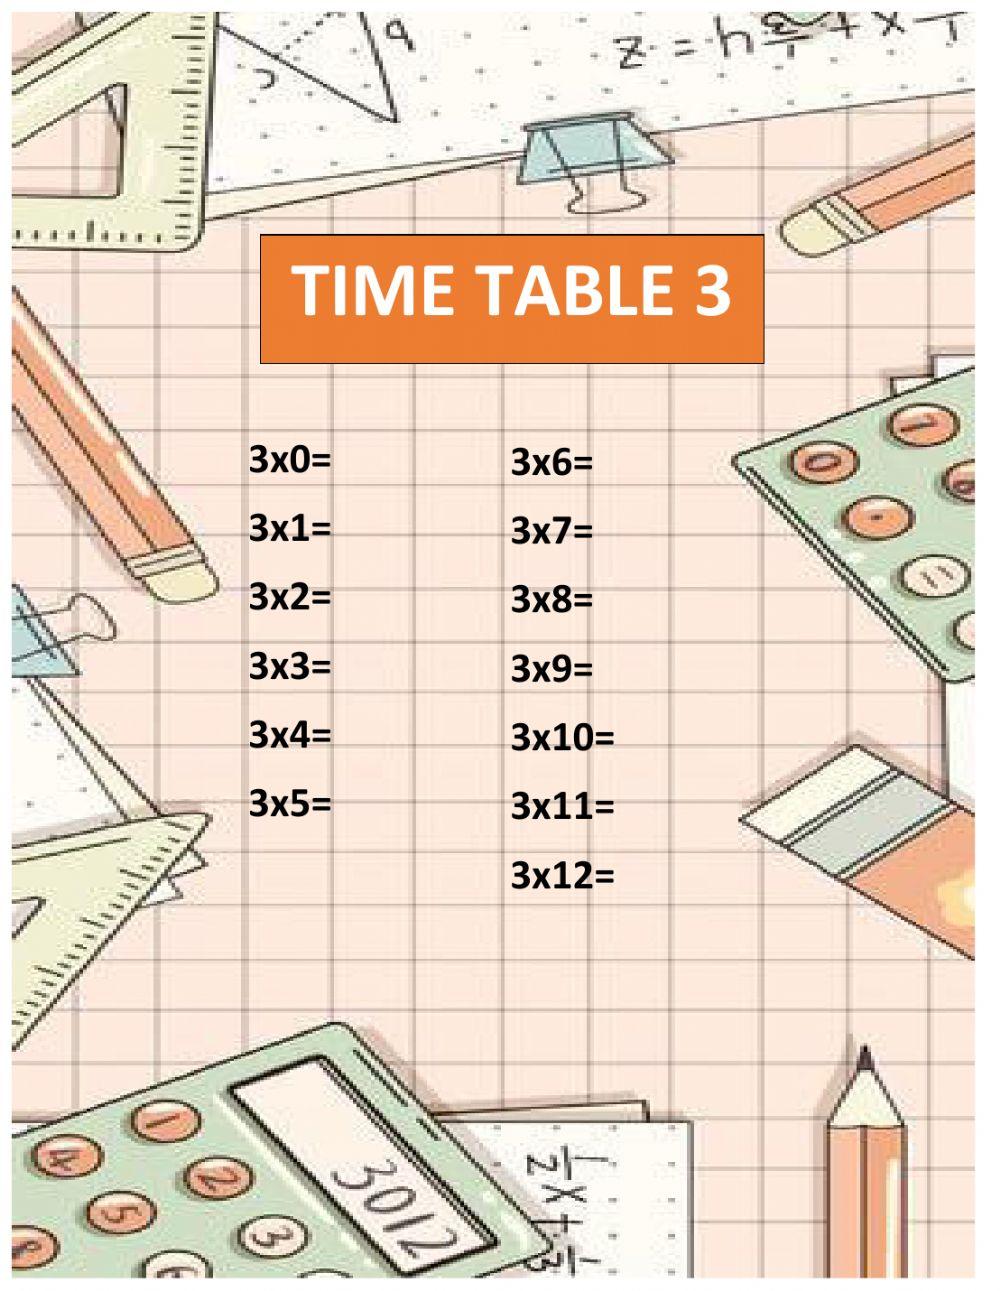 Time table 3